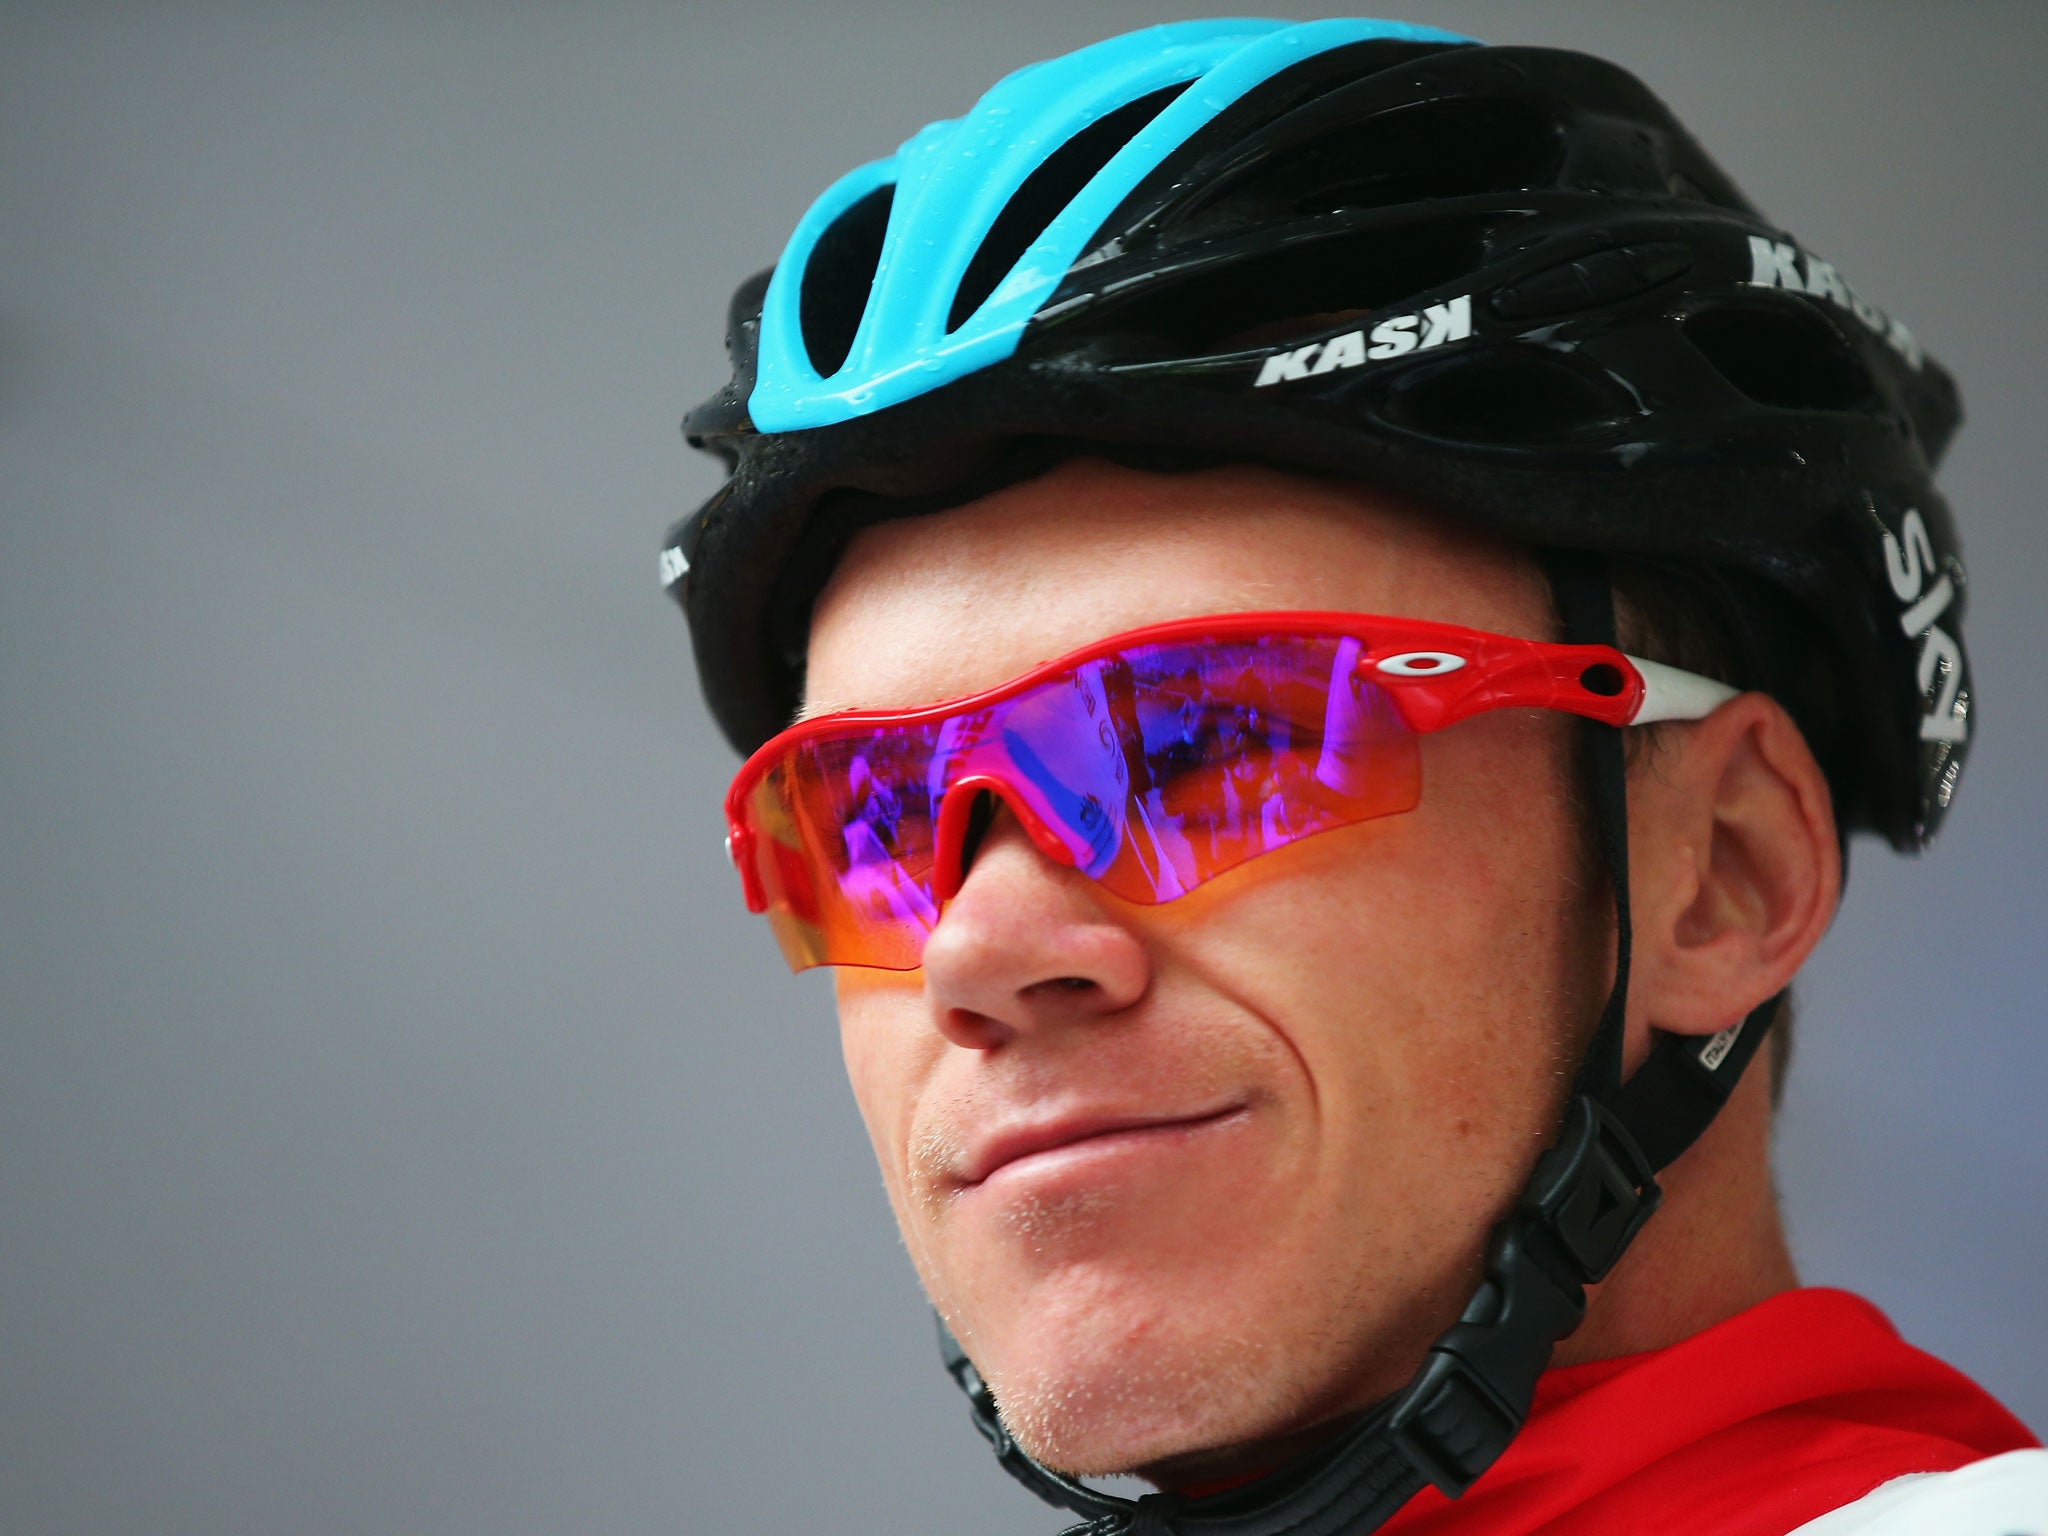 Tour de France winner Chris Froome has admitted his worries over rumours